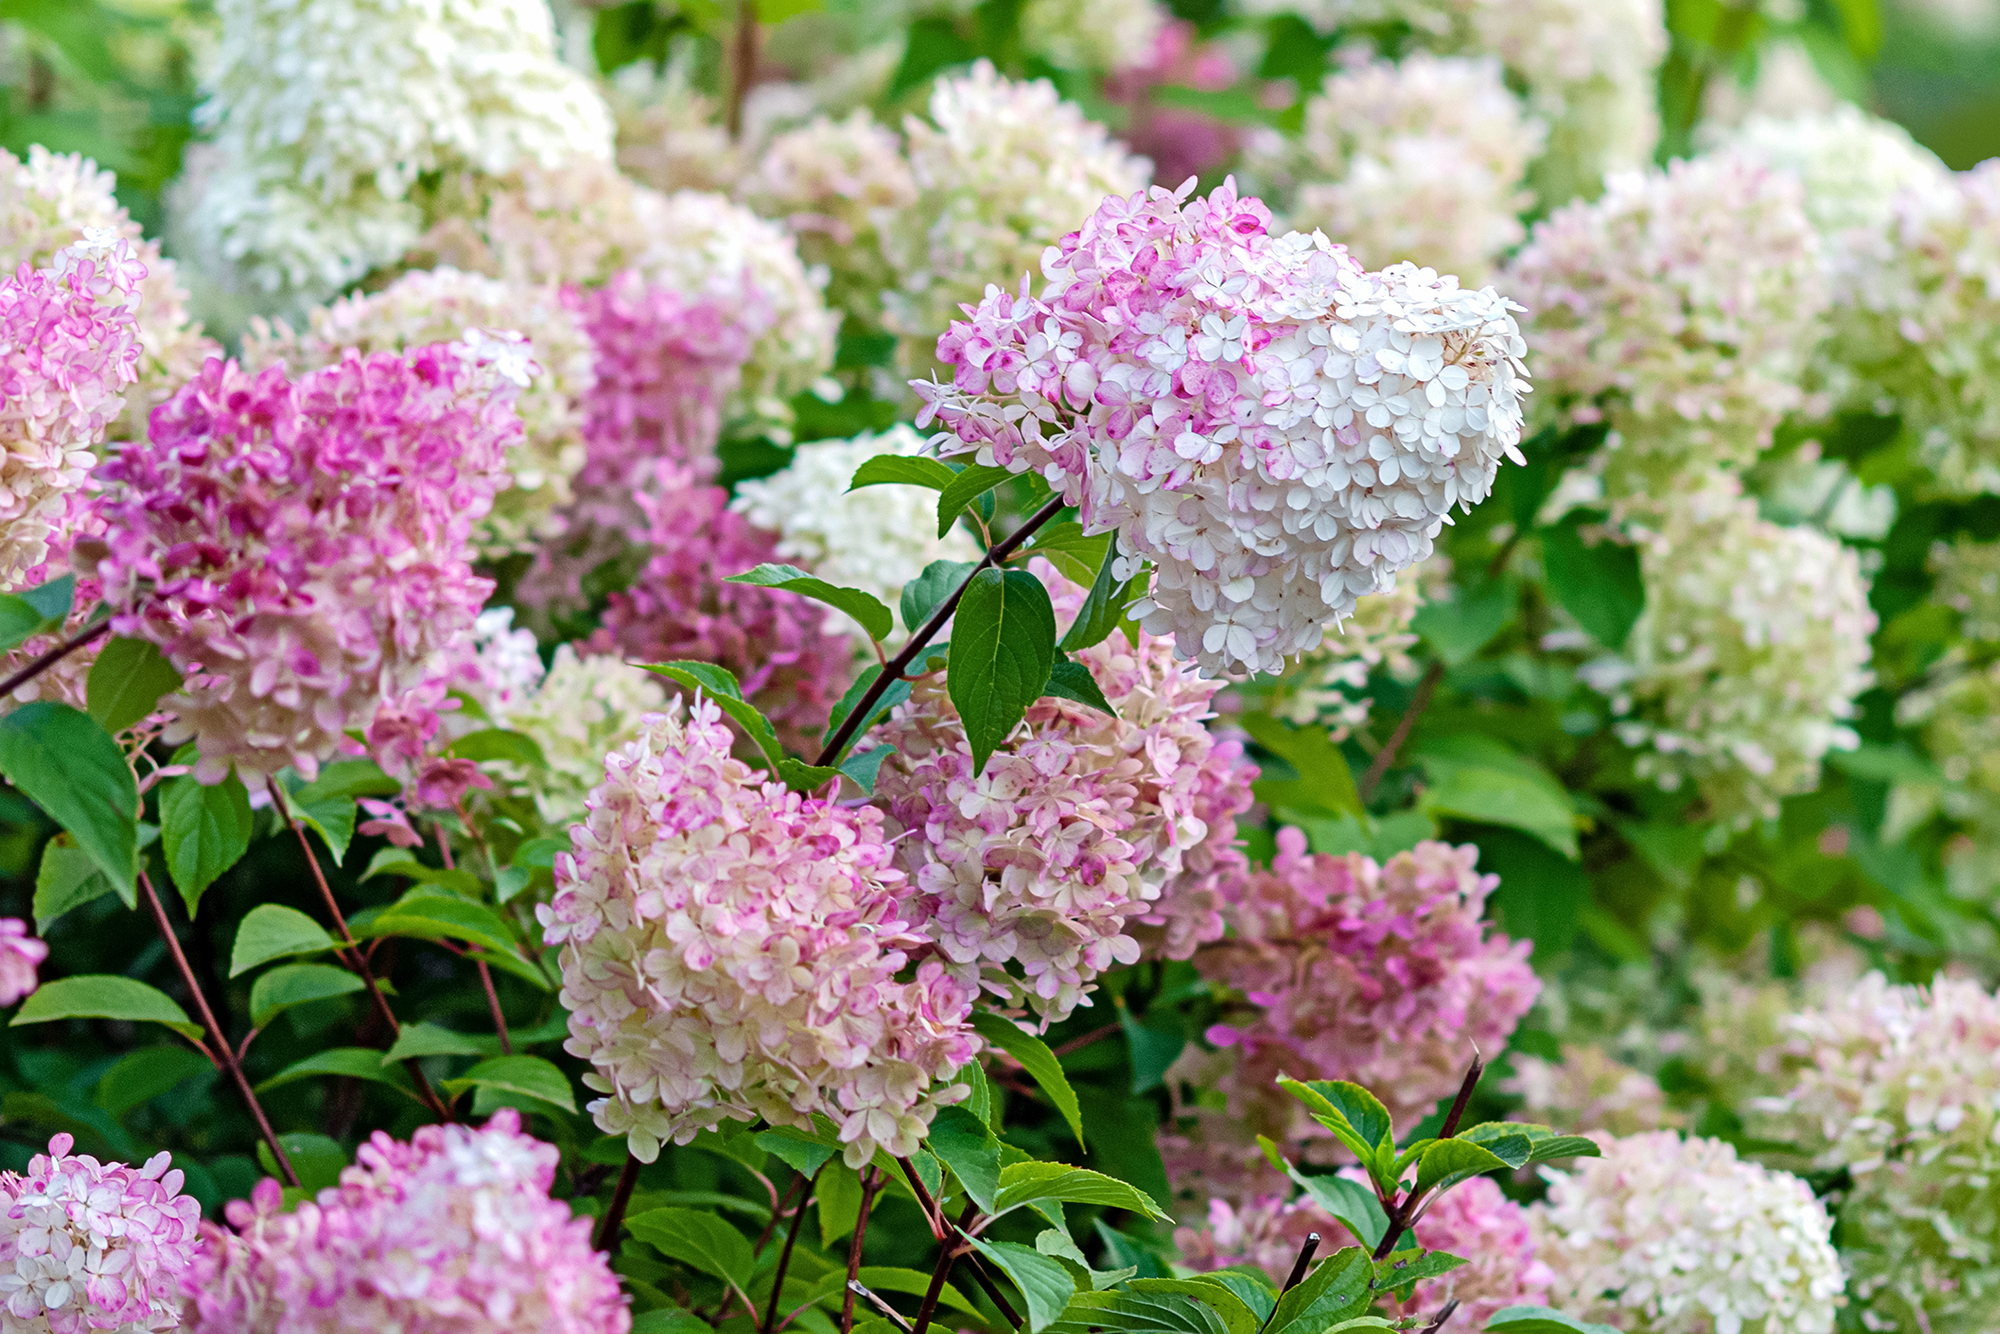 Image of Limelight Hydrangea Bush with Pink Flowers